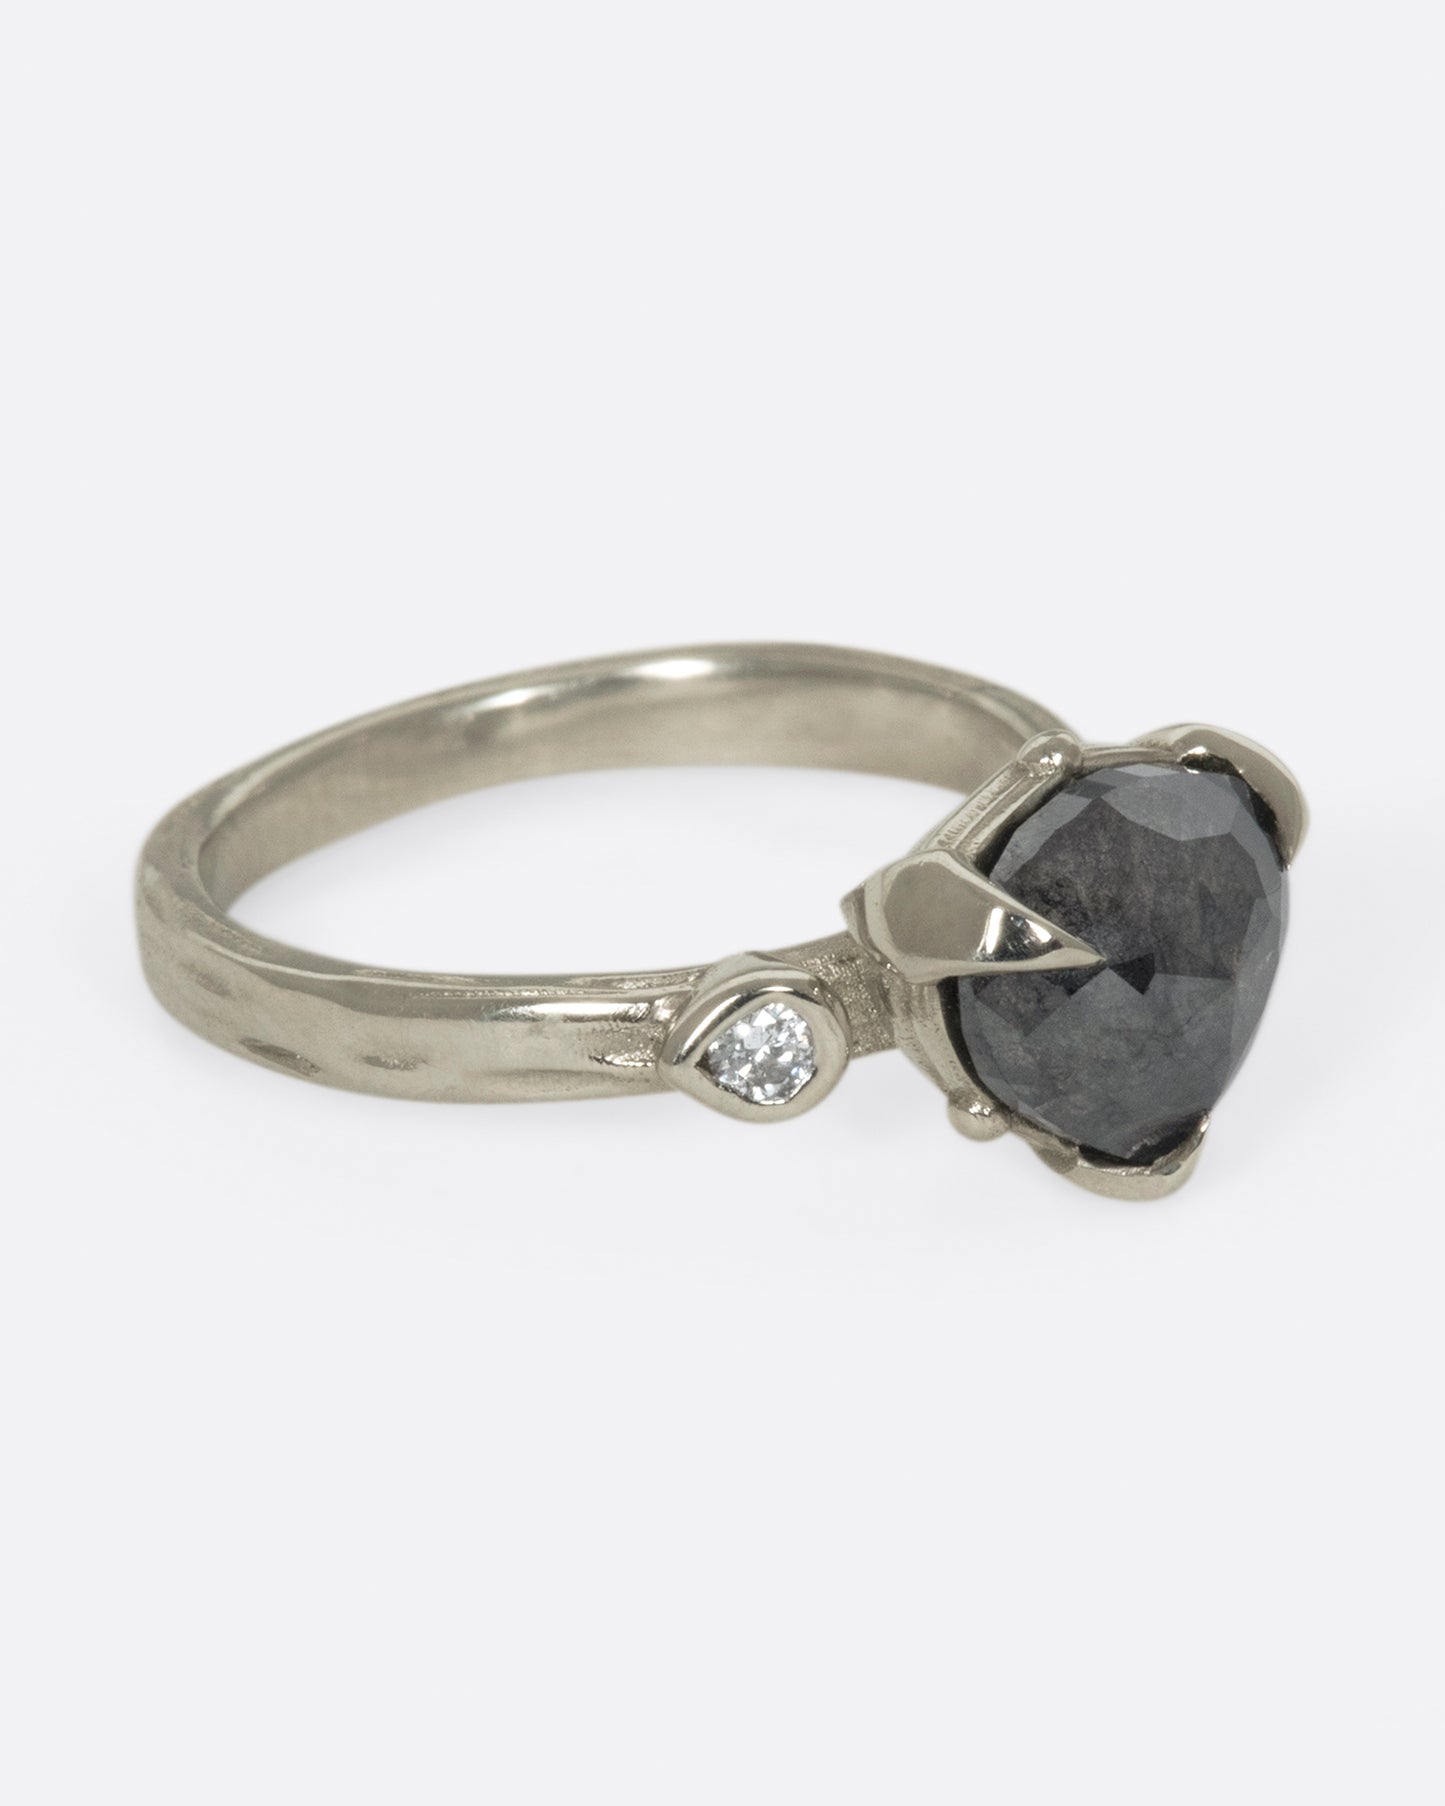 A dark, glamorous ring with a rose cut, heart-shaped diamond embraced in pointed claw settings.